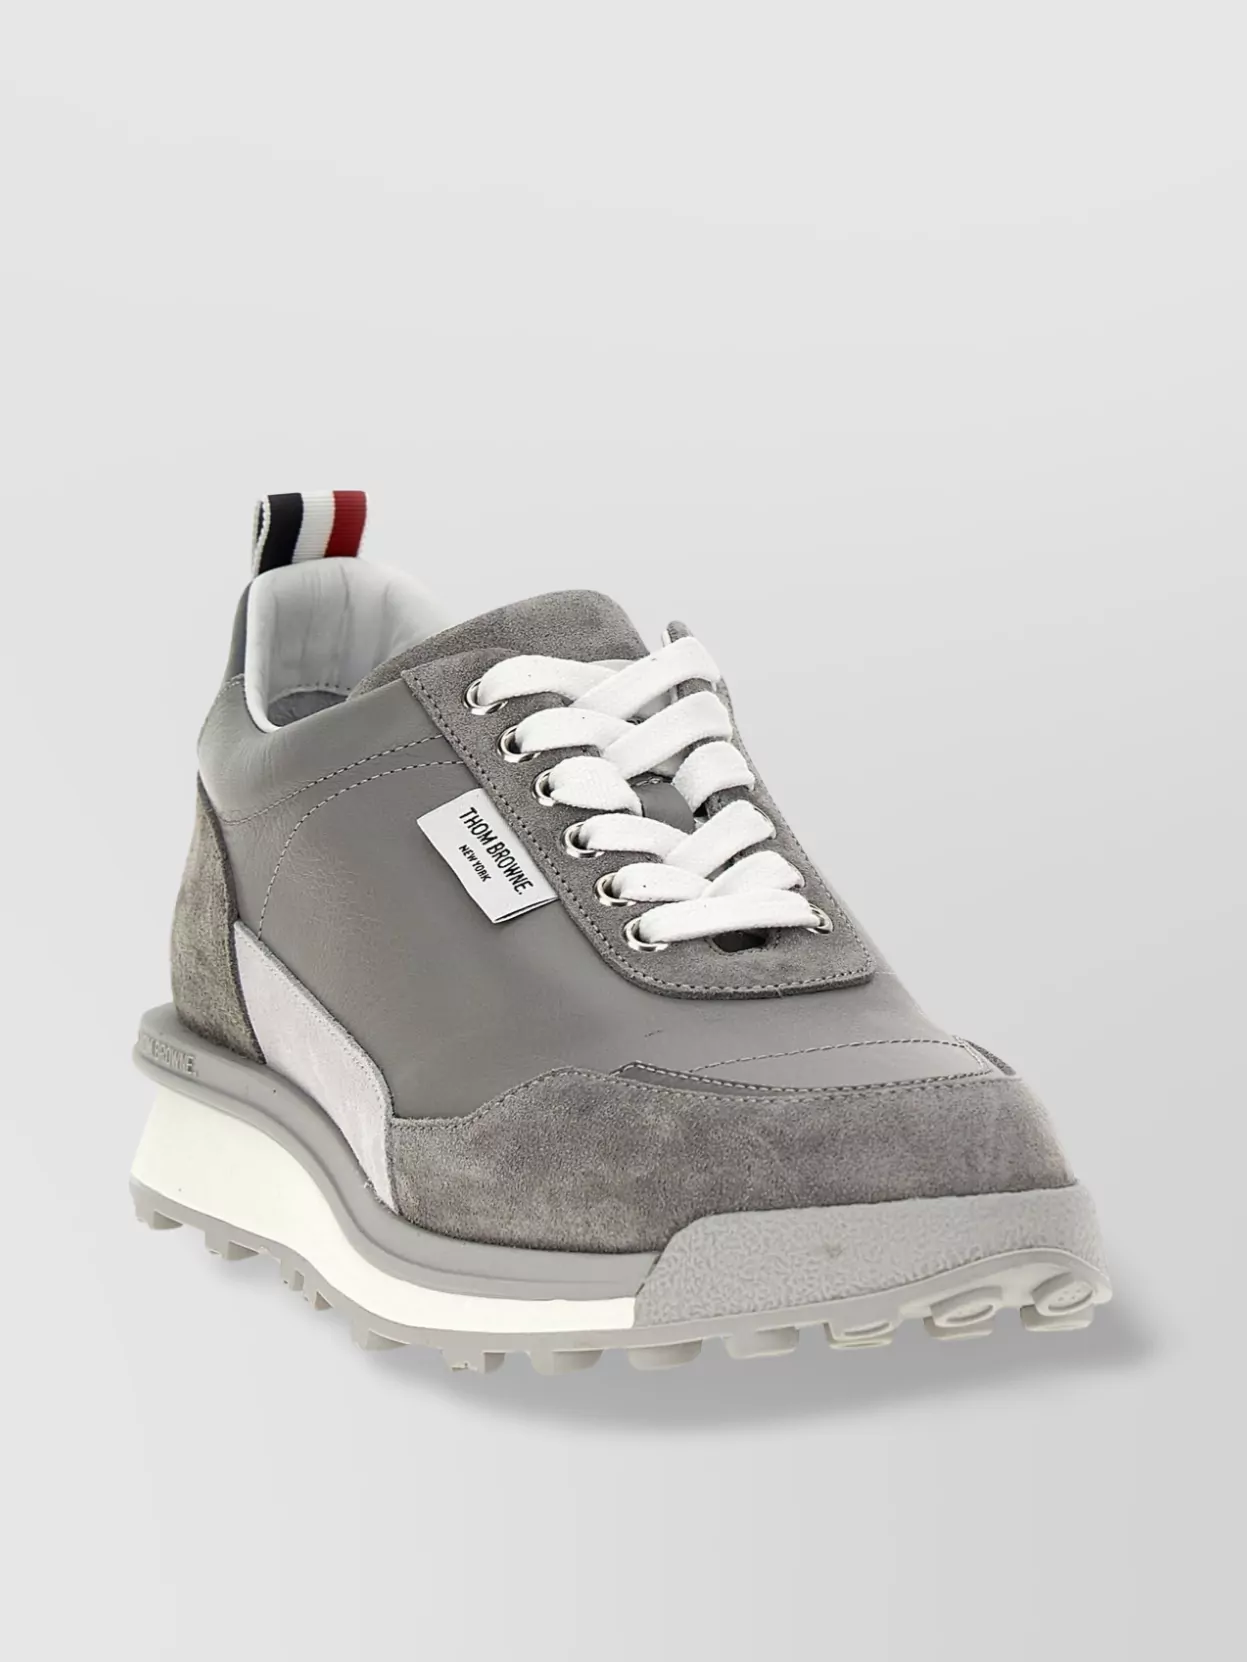 Thom Browne Heritage Round Toe Suede Sneakers In Gray